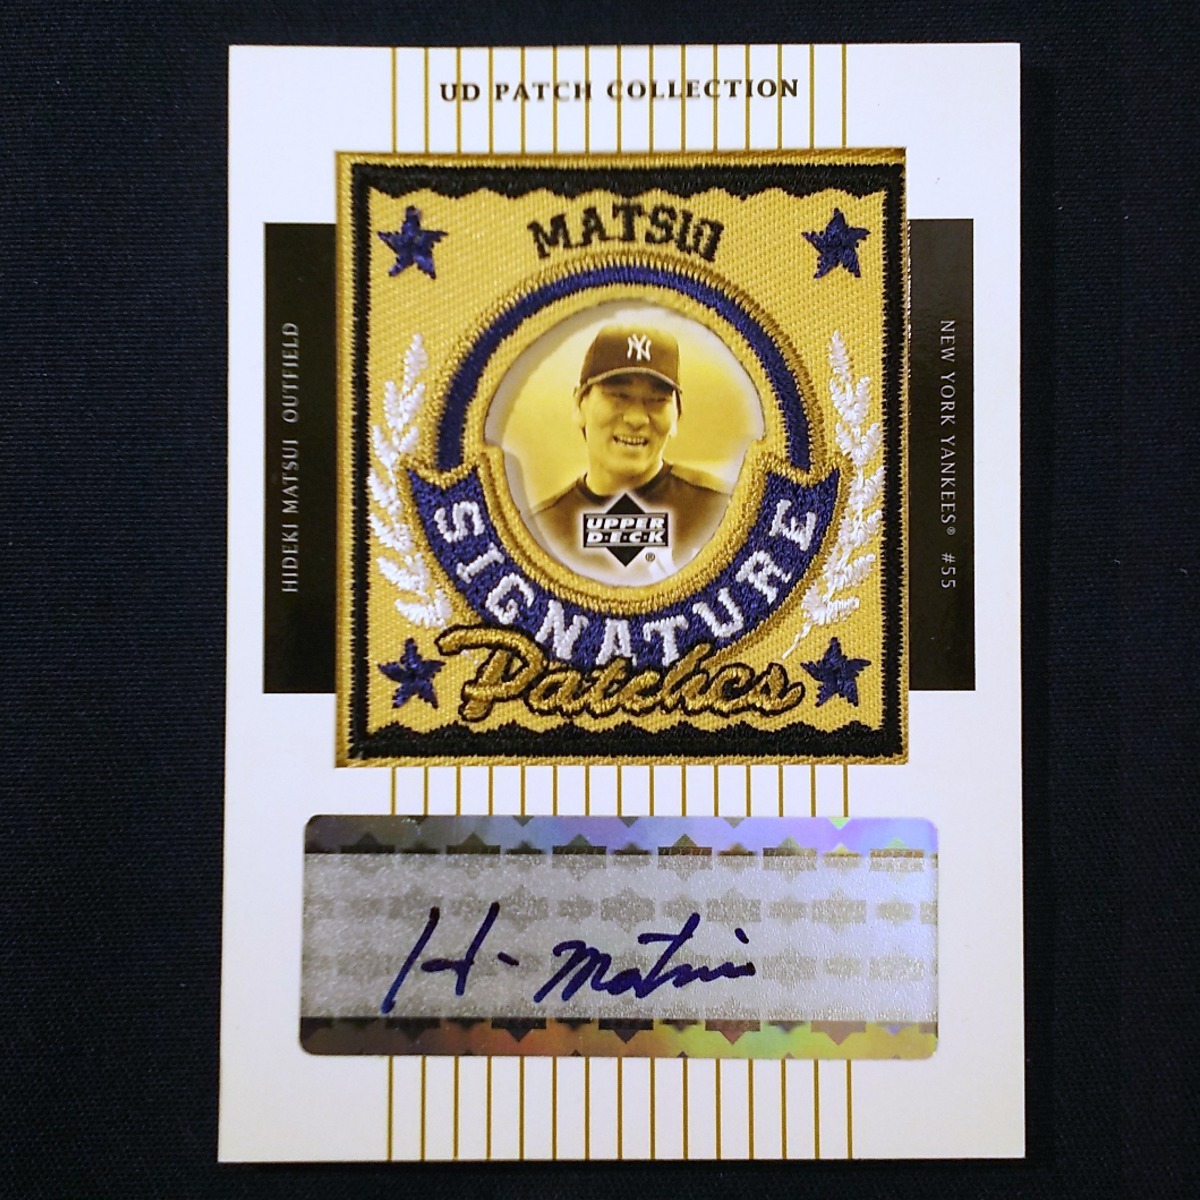 ◆Hideki Matsui【Auto card】UD Patch Collection Signature Patches　（検）松井秀喜 直筆サイン New York Yankees ヤンキース